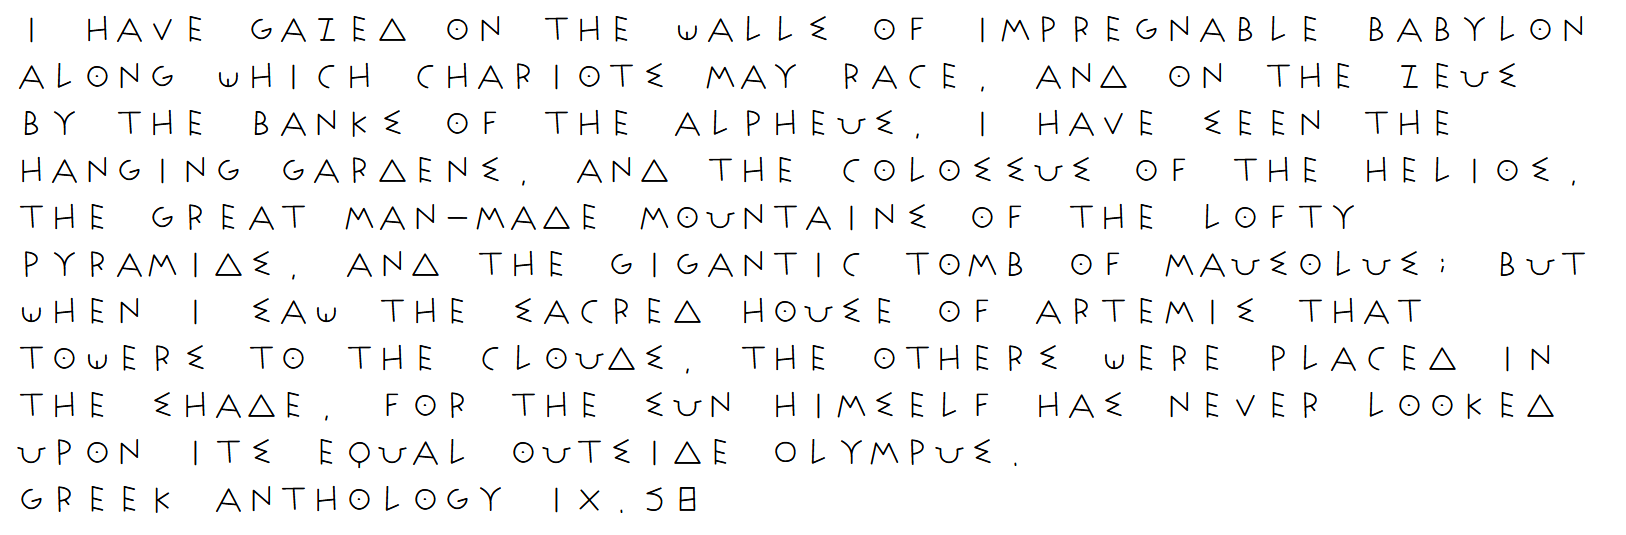 Quotation of Antipater of Sidon's Greek Anthology in ancient Greek inspired font: "I have gazed on the walls of impregnable Babylon along which chariots may race, and on the Zeus by the banks of the Alpheus, I have seen the hanging gardens, and the Colossus of the Helios, the great man-made mountains of the lofty pyramids, and the gigantic tomb of Mausolus; but when I saw the sacred house of Artemis that towers to the clouds, the others were placed in the shade, for the sun himself has never looked upon its equal outside Olympus.&quot; Greek Anthology IX.58" title="Quotation of Antipater of Sidon's Greek Anthology in ancient Greek inspired font: &quot;I have gazed on the walls of impregnable Babylon along which chariots may race, and on the Zeus by the banks of the Alpheus, I have seen the hanging gardens, and the Colossus of the Helios, the great man-made mountains of the lofty pyramids, and the gigantic tomb of Mausolus; but when I saw the sacred house of Artemis that towers to the clouds, the others were placed in the shade, for the sun himself has never looked upon its equal outside Olympus." Greek Anthology IX.58